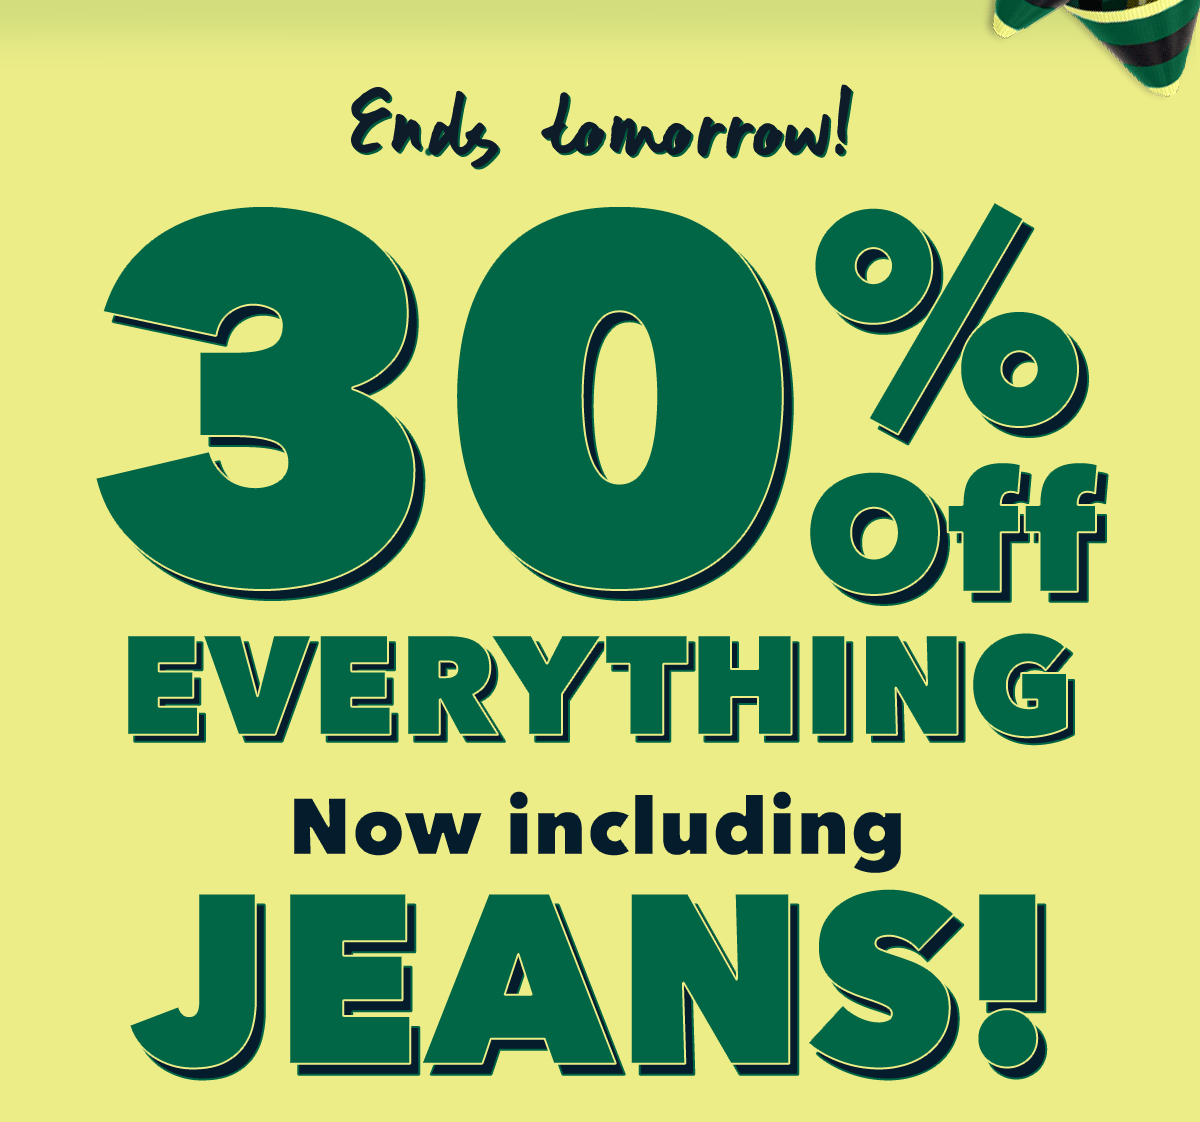 Ends tomorrow! 30% OFF EVERYTHING Now including JEANS!